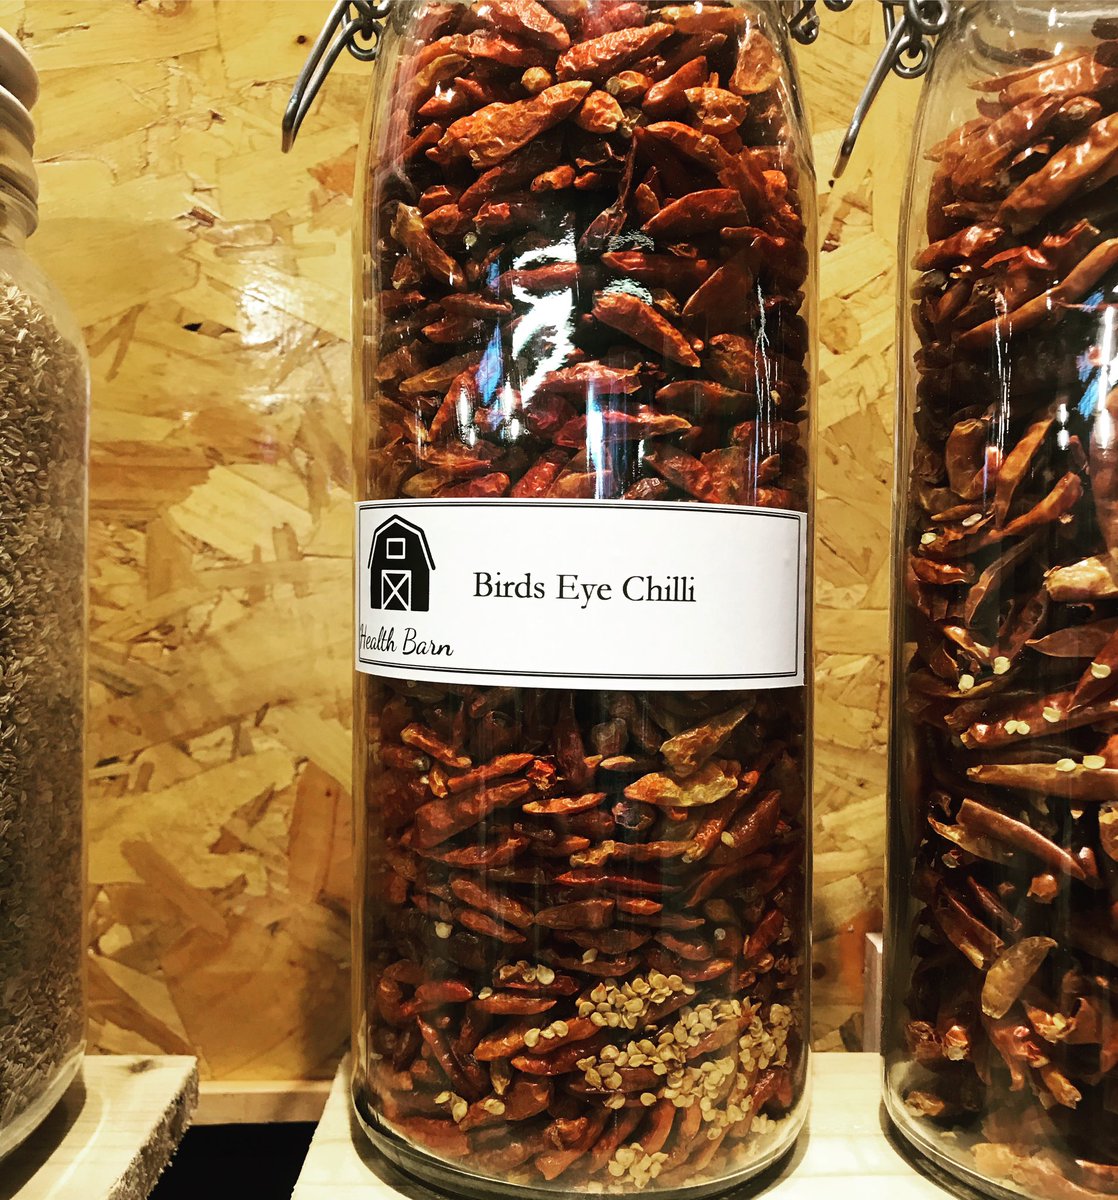 The bird’s eye chilli is small, but is quite hot. It measures around 50k to 100k on the Scoville units. Great for adding some heat to your food #Scoville #food #birdseyechilli #Durham @DurhamMarkets @IndieDurhamCity